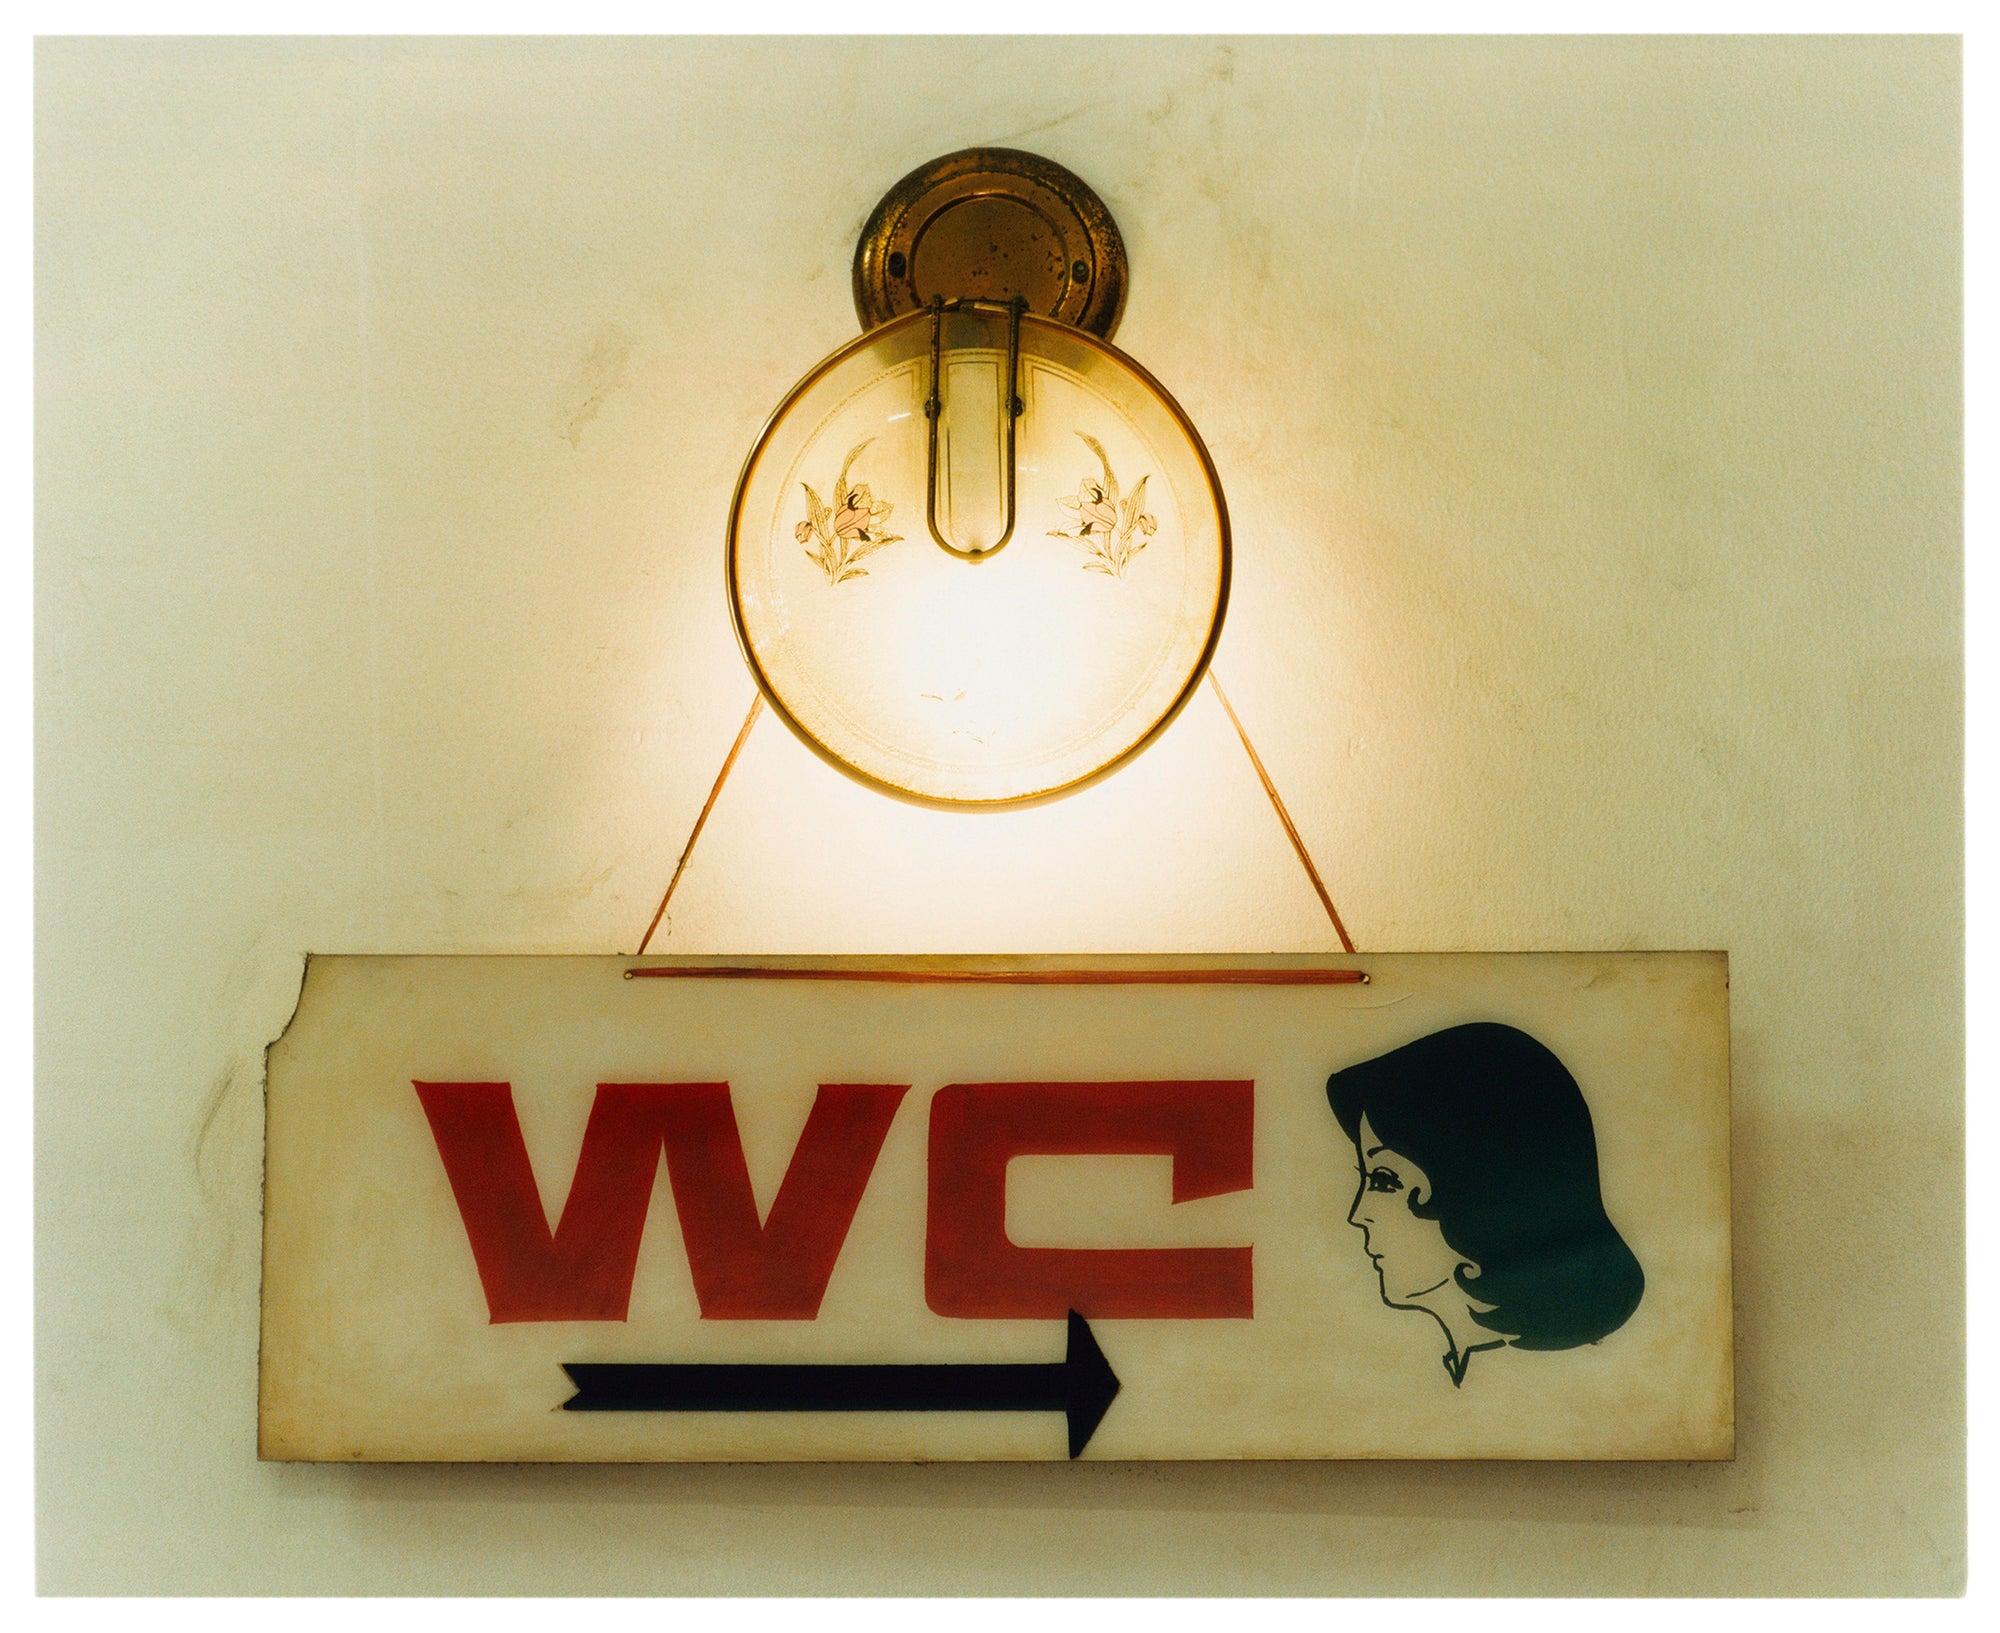 WC, a retro kitsch vintage sign captured in Ho Chi Minh City, Vietnam. This piece is a perfect balance of tone, texture and typography.